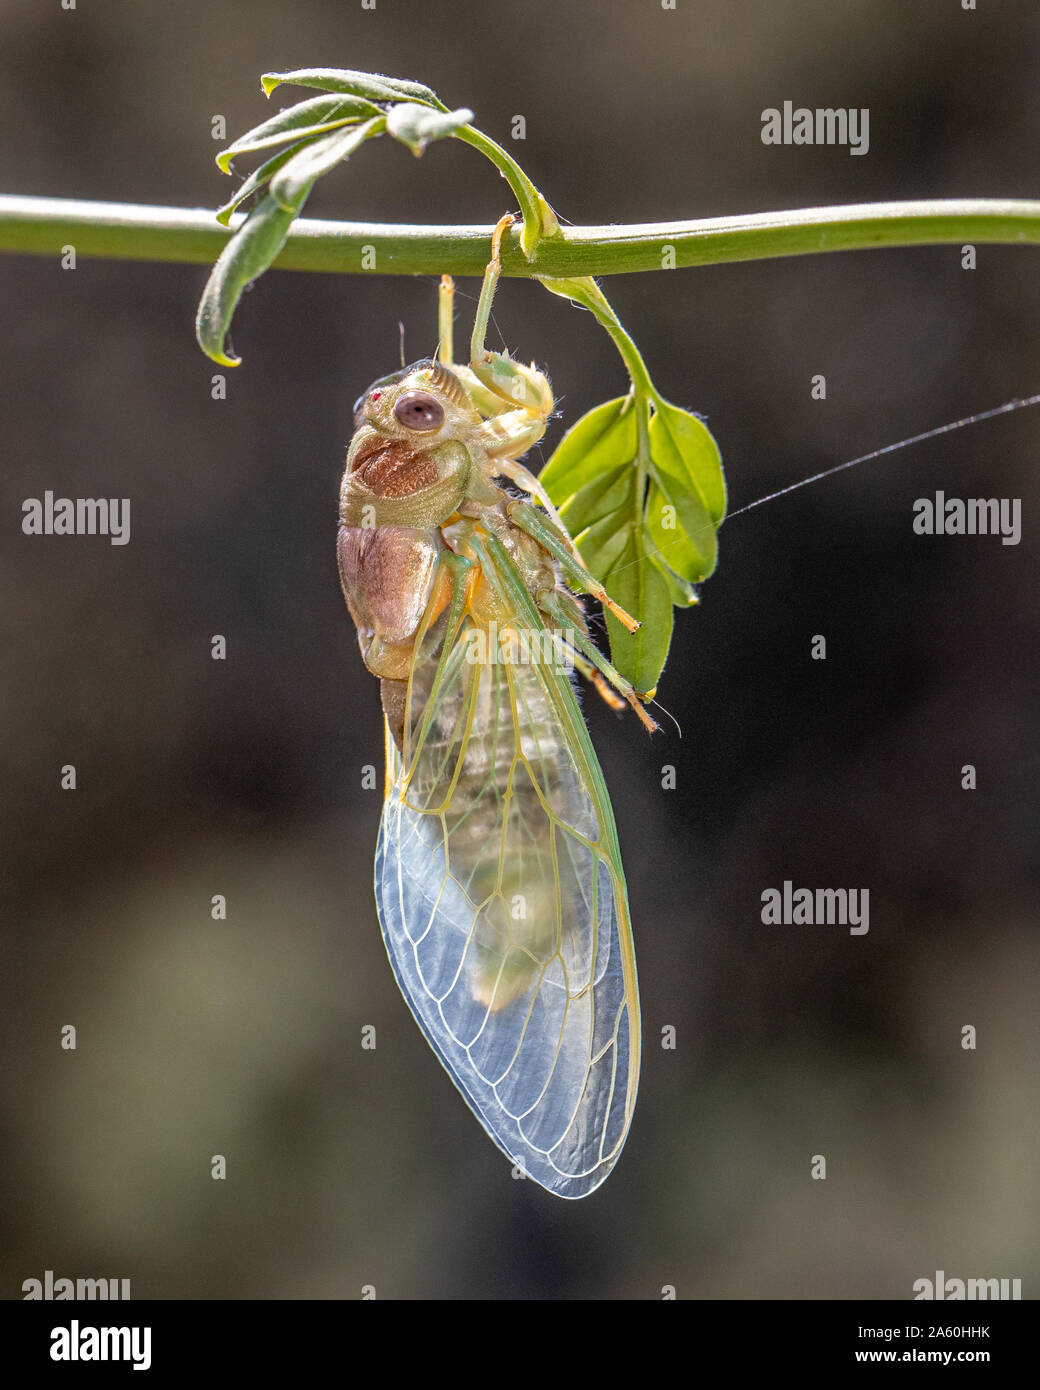 European Cicada (Lyristes plebejus) drying out in the sun after emerging from nymphal shell, France, Gard, provence Stock Photo